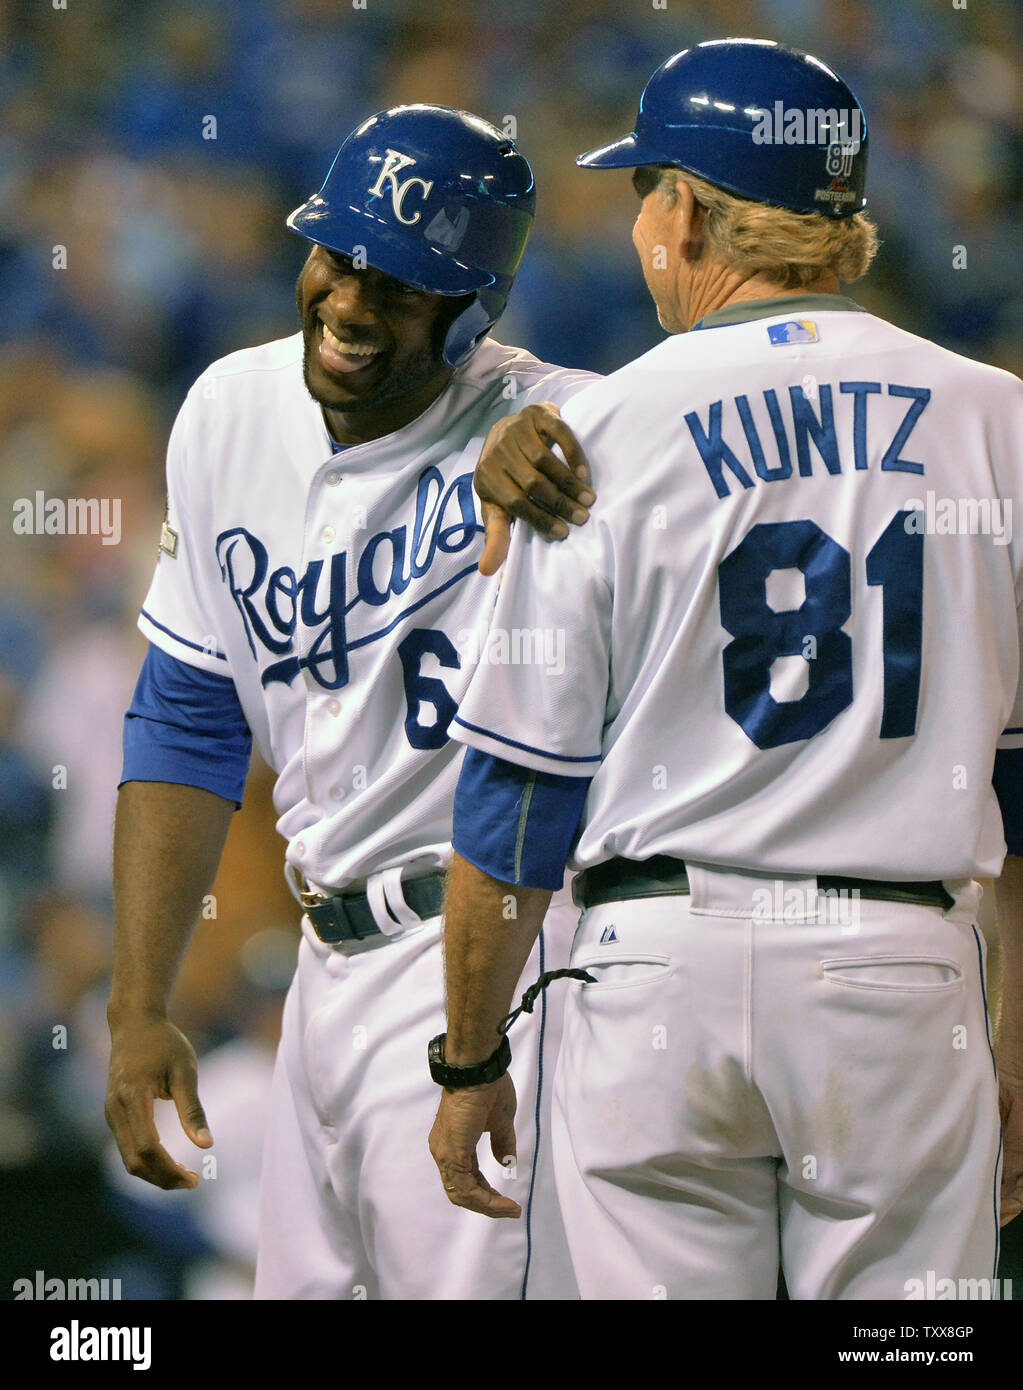 kansas-city-royals-center-fielder-lorenzo-cain-6-smiles-alongside-first-base-coach-rusty-kuntz-after-beating-out-an-infield-single-during-the-third-inning-against-the-toronto-blue-jays-in-the-alcs-game-6-at-kaufman-stadium-in-kansas-city-on-october-23-2015-kansas-city-hold-a-3-2-series-lead-photo-by-kevin-dietschupi-TXX8GP.jpg